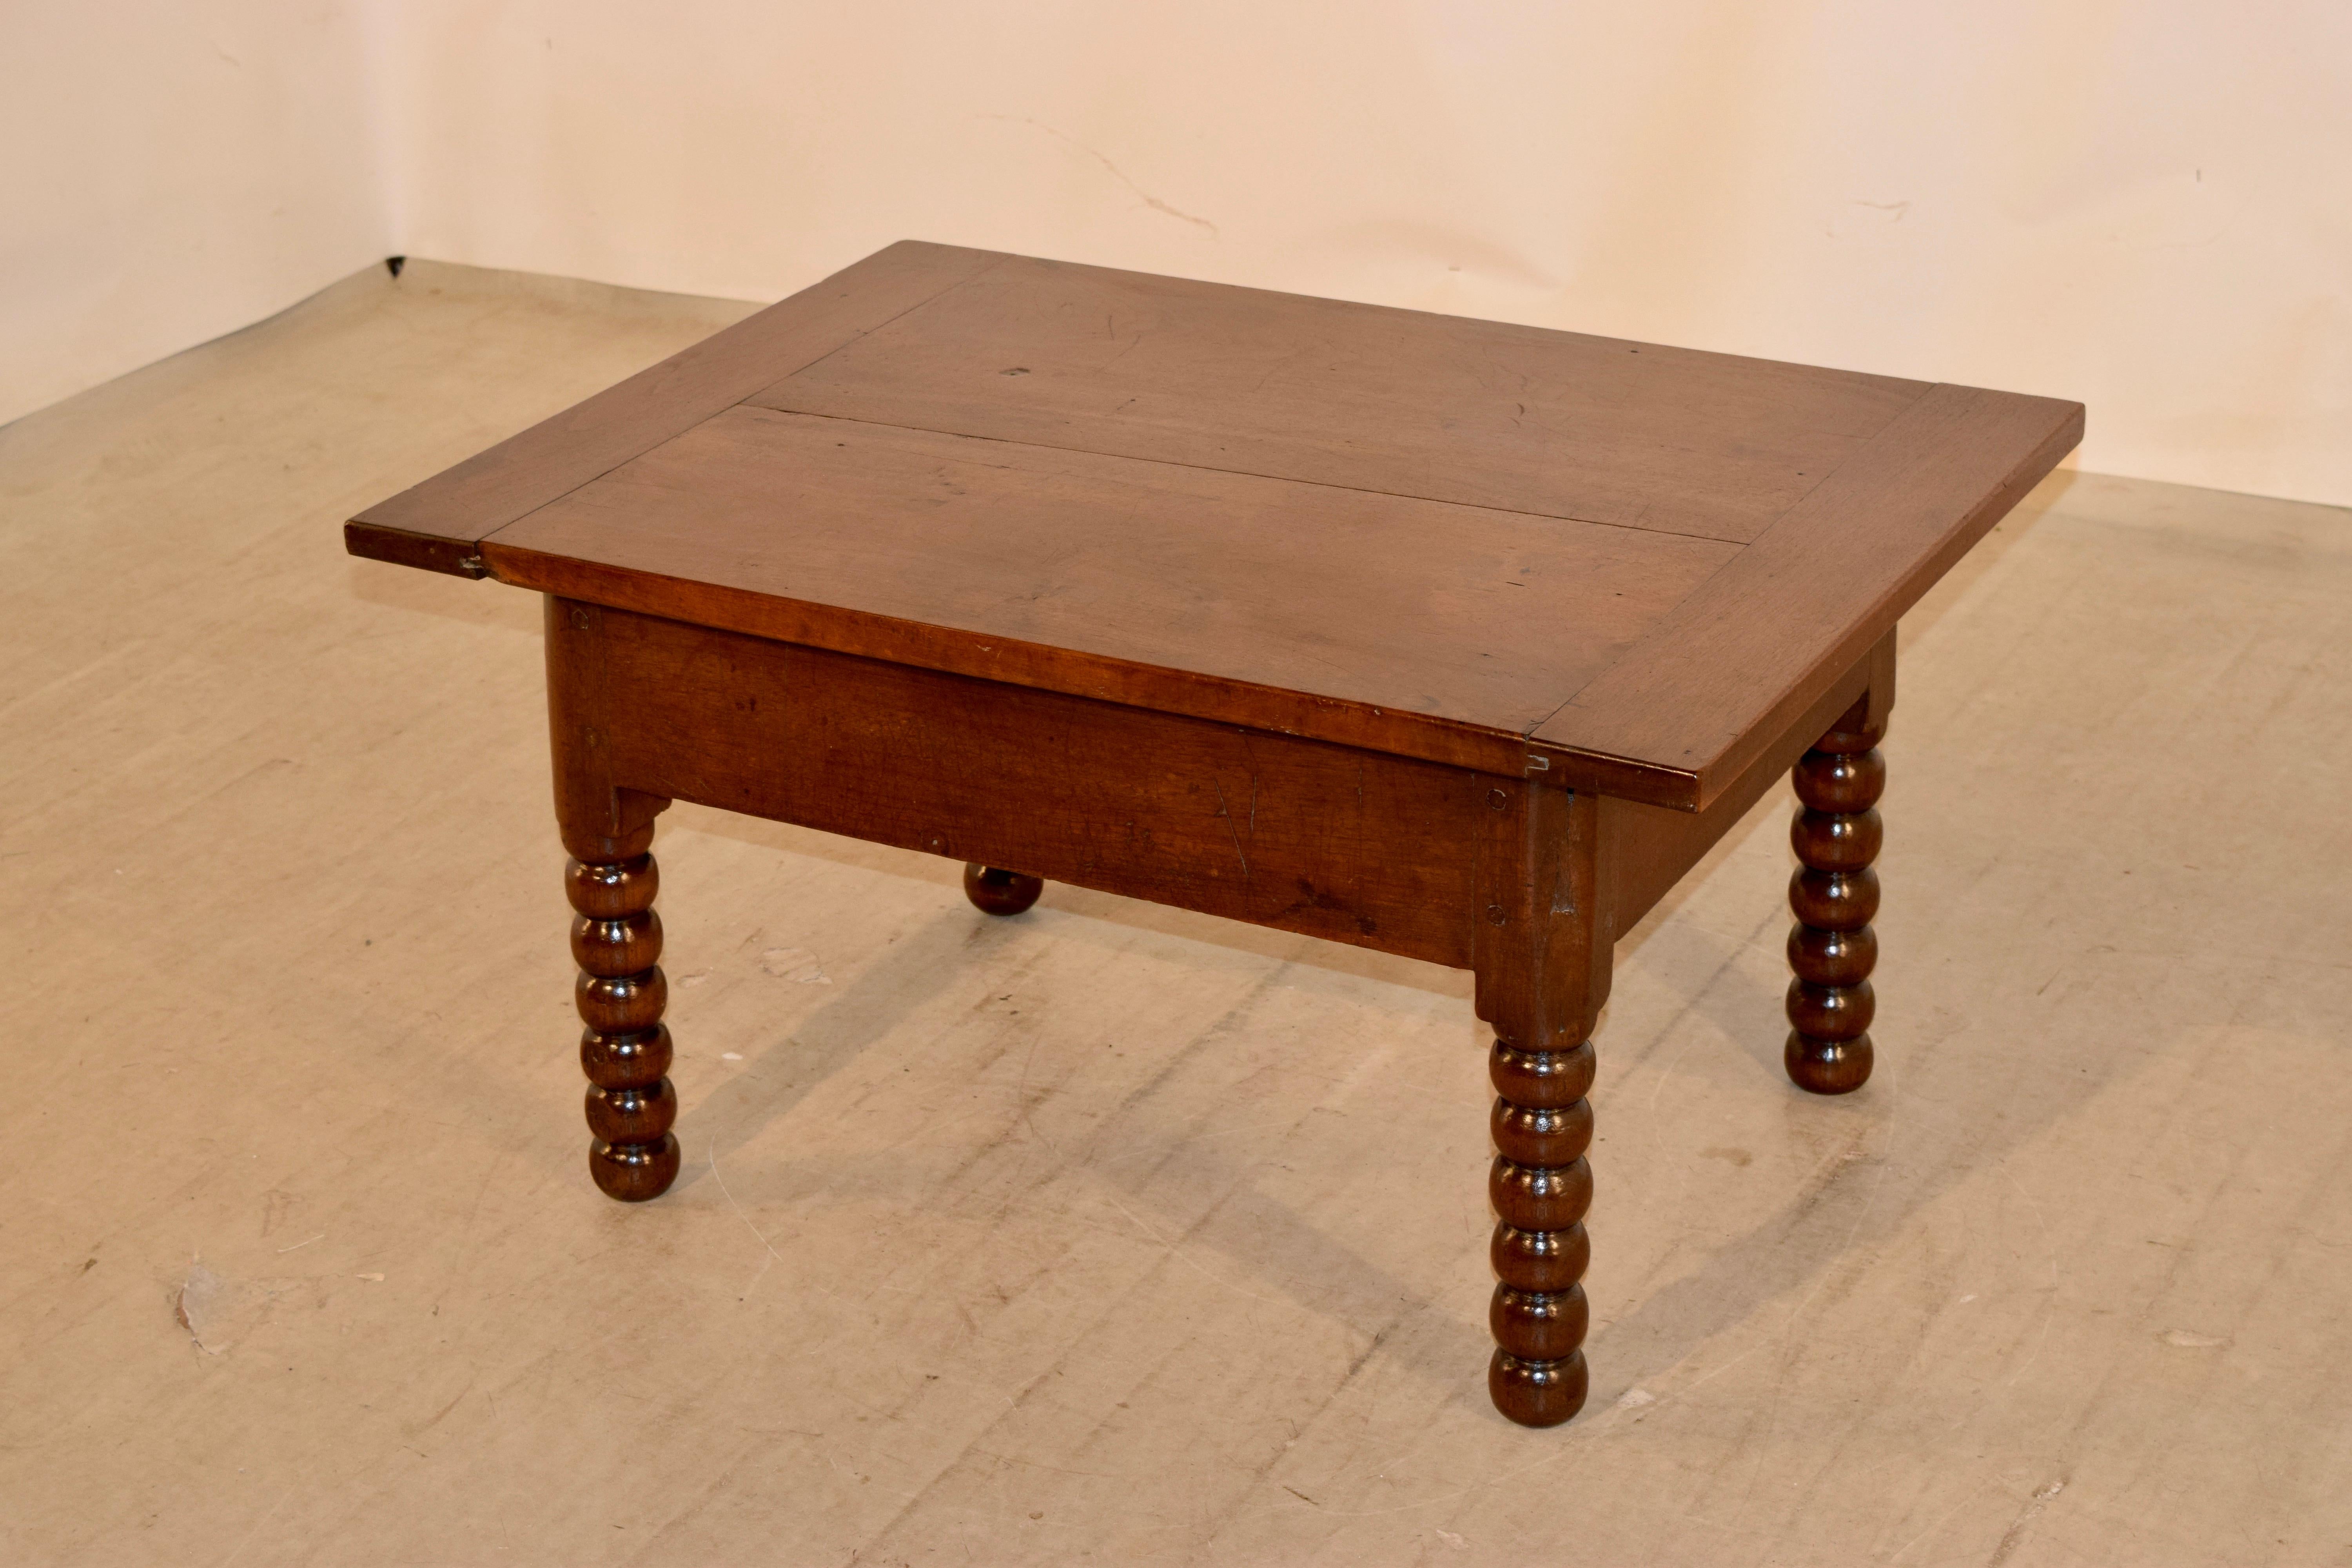 Turned Early 19th Century Walnut Coffee Table